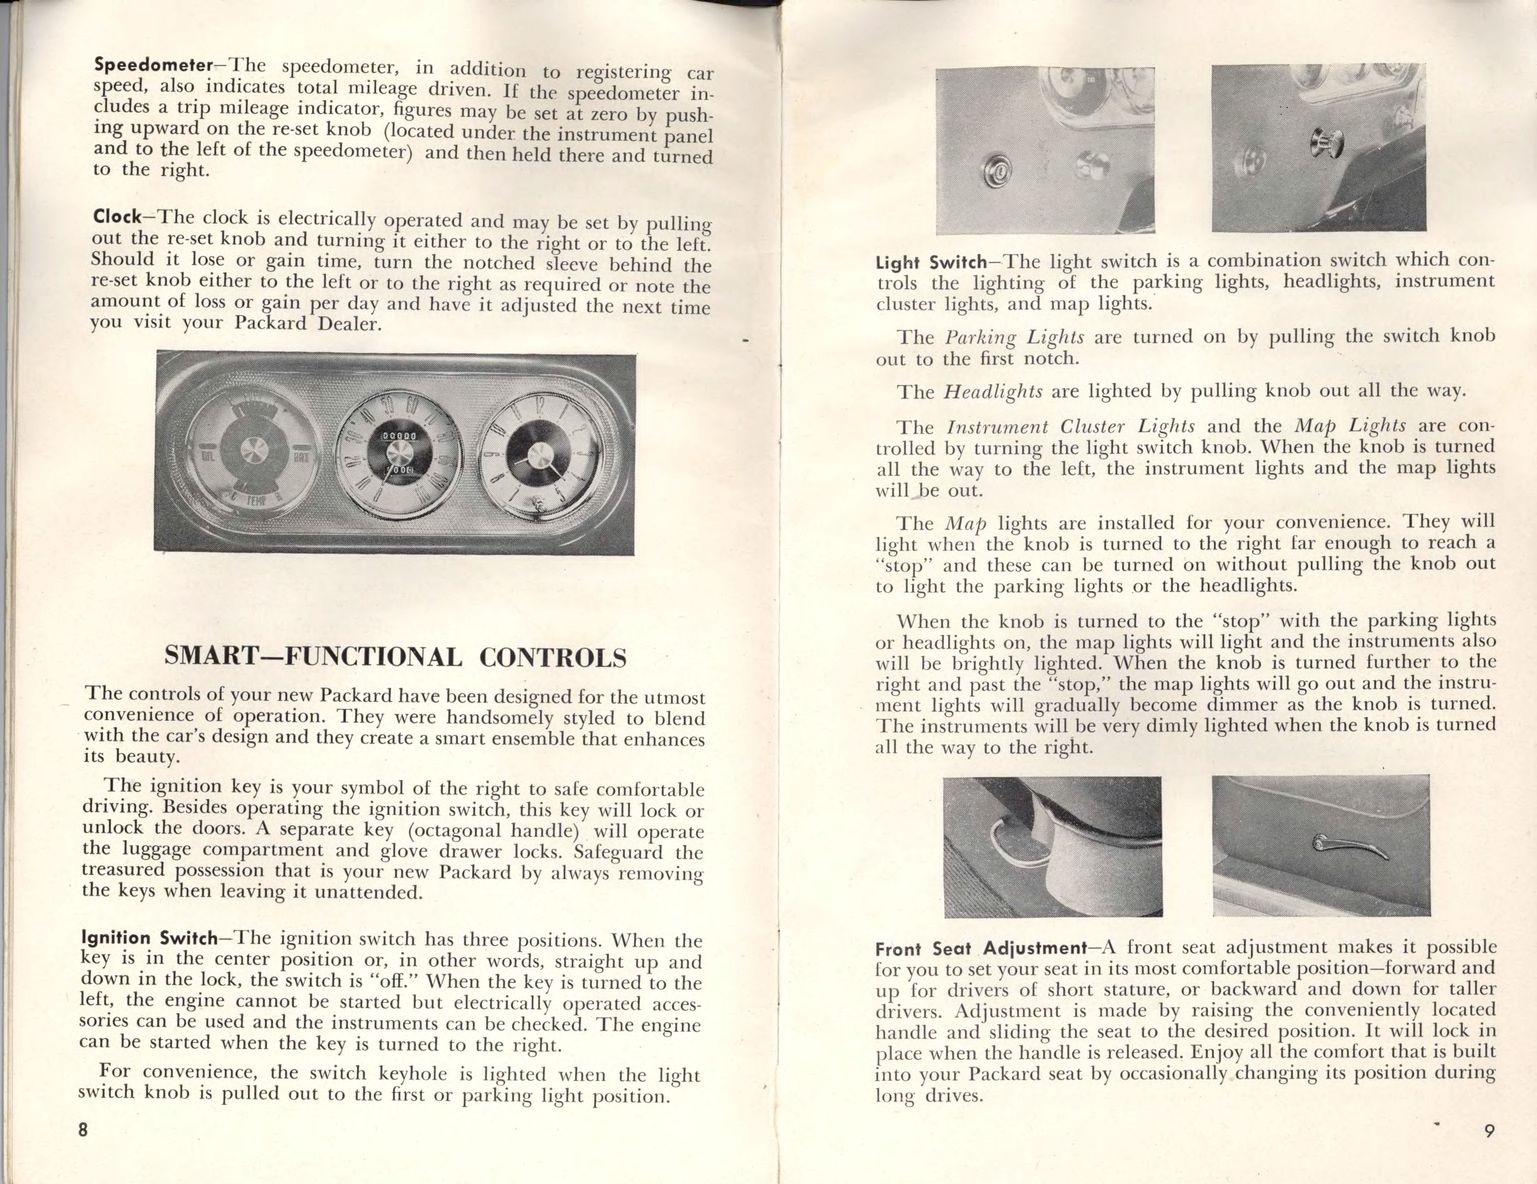 1951 Packard Owners Manual Page 3